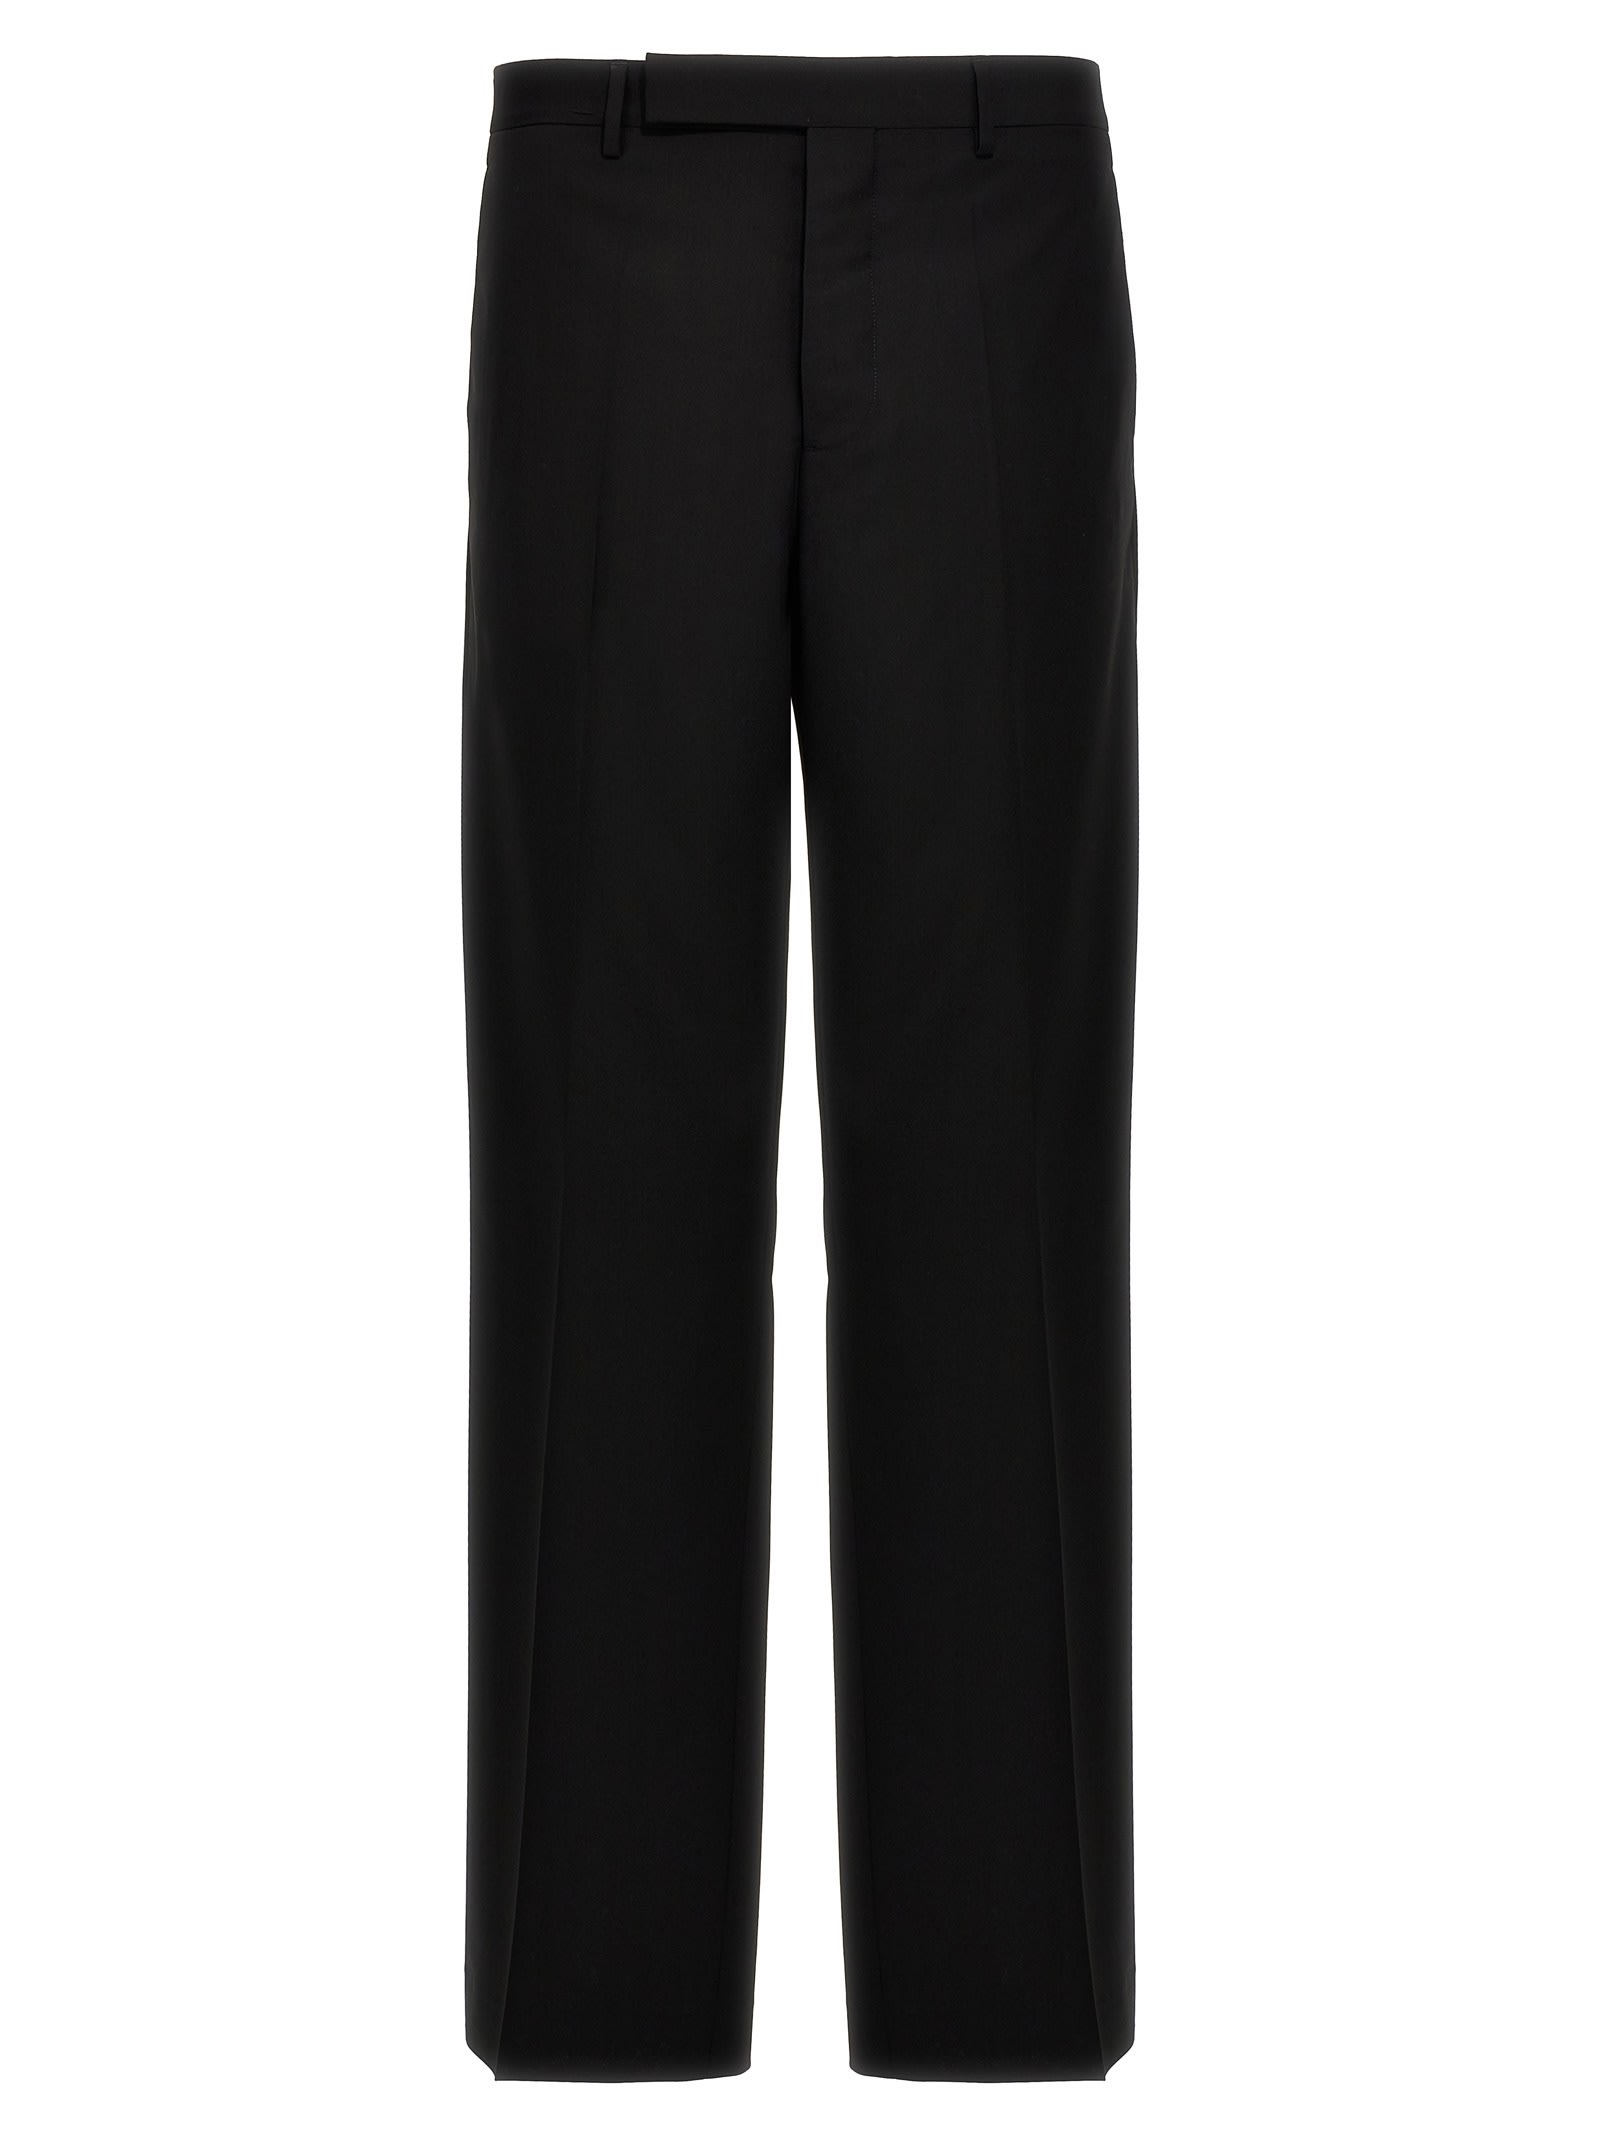 RICK OWENS TAILORED DIETRICH trousers